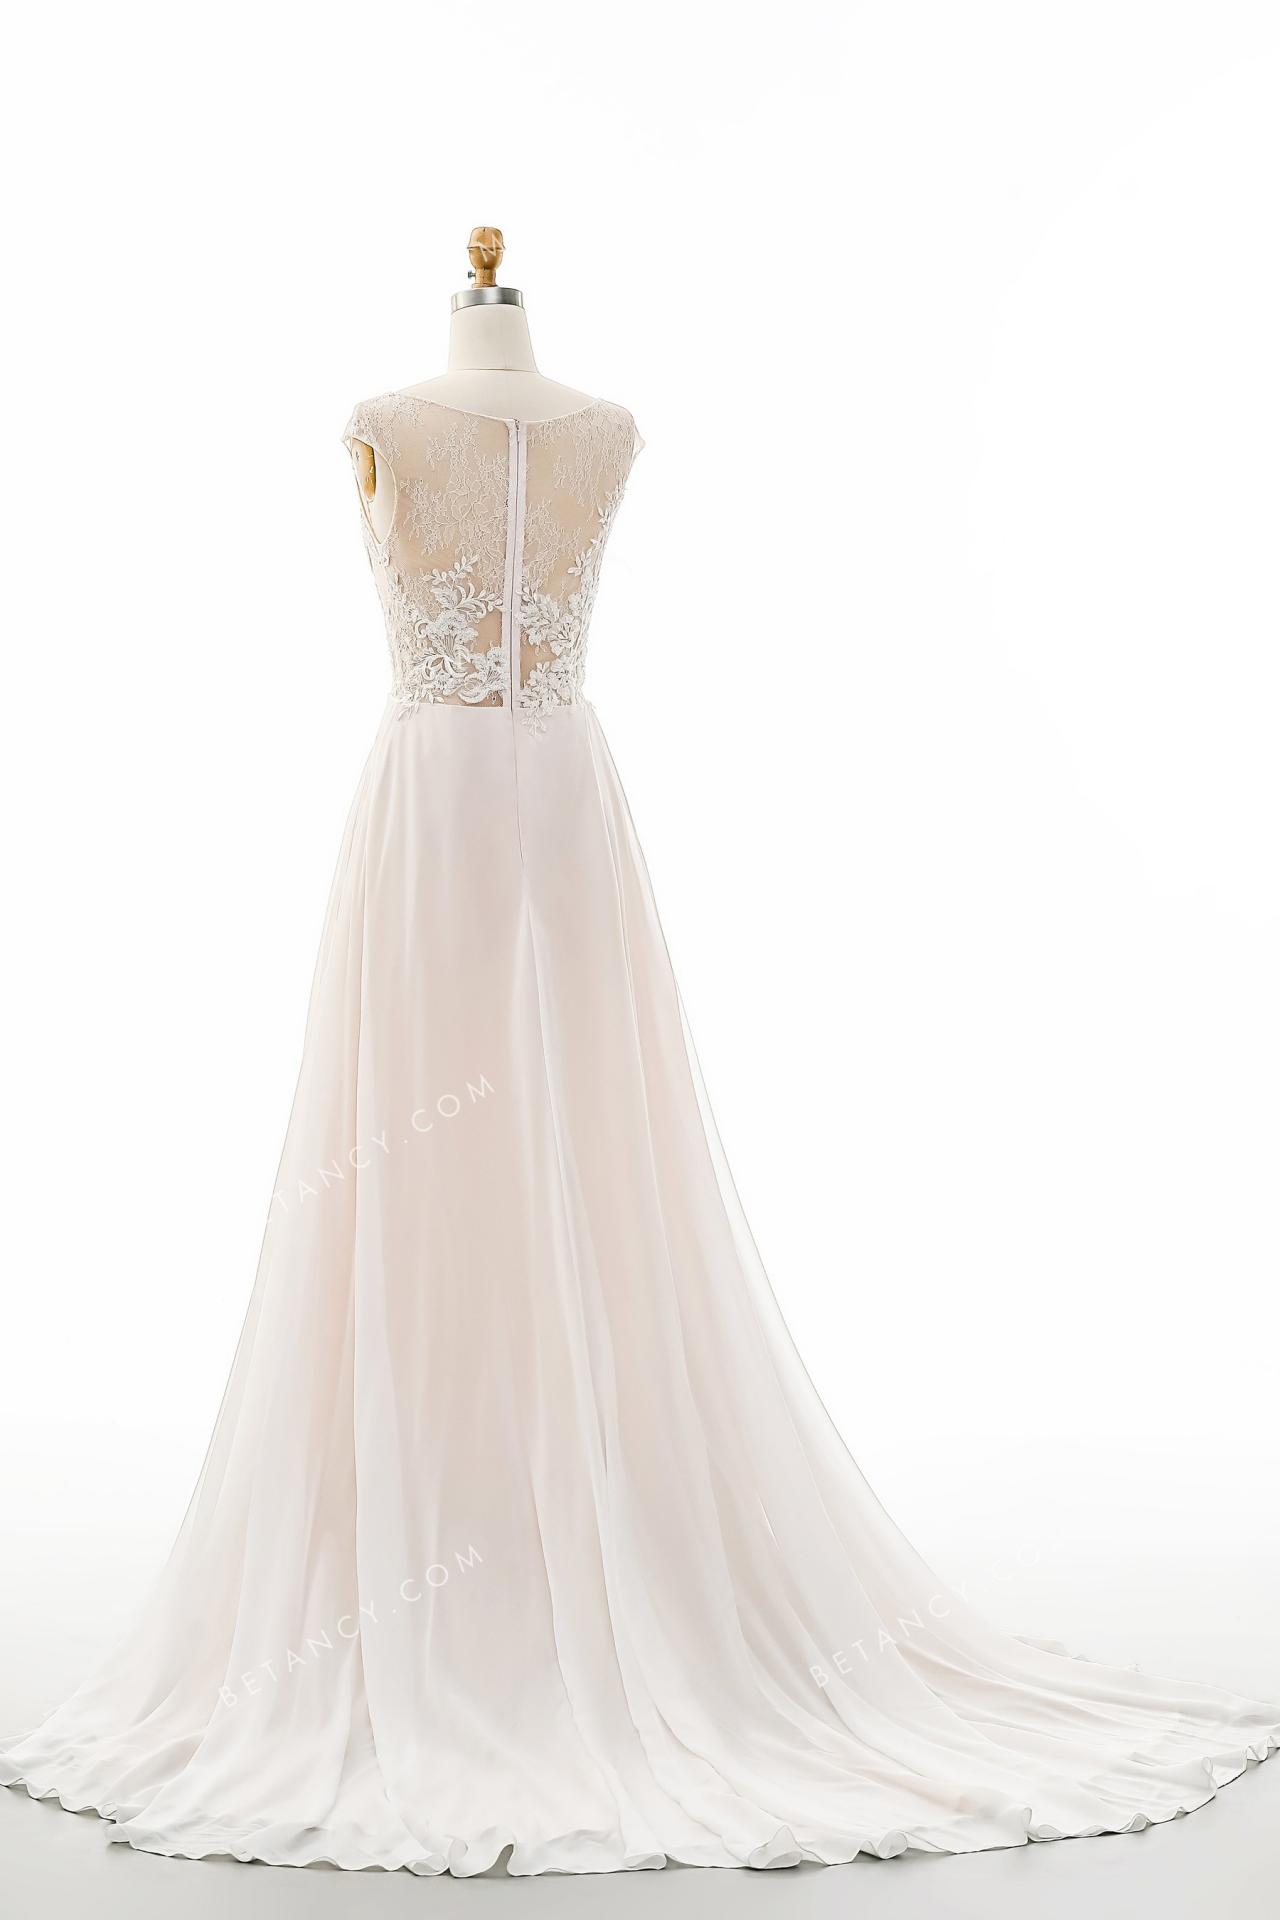 Illusion cap sleeve wedding dress with intricate fusion of soft lace and beaded floral appliques 6